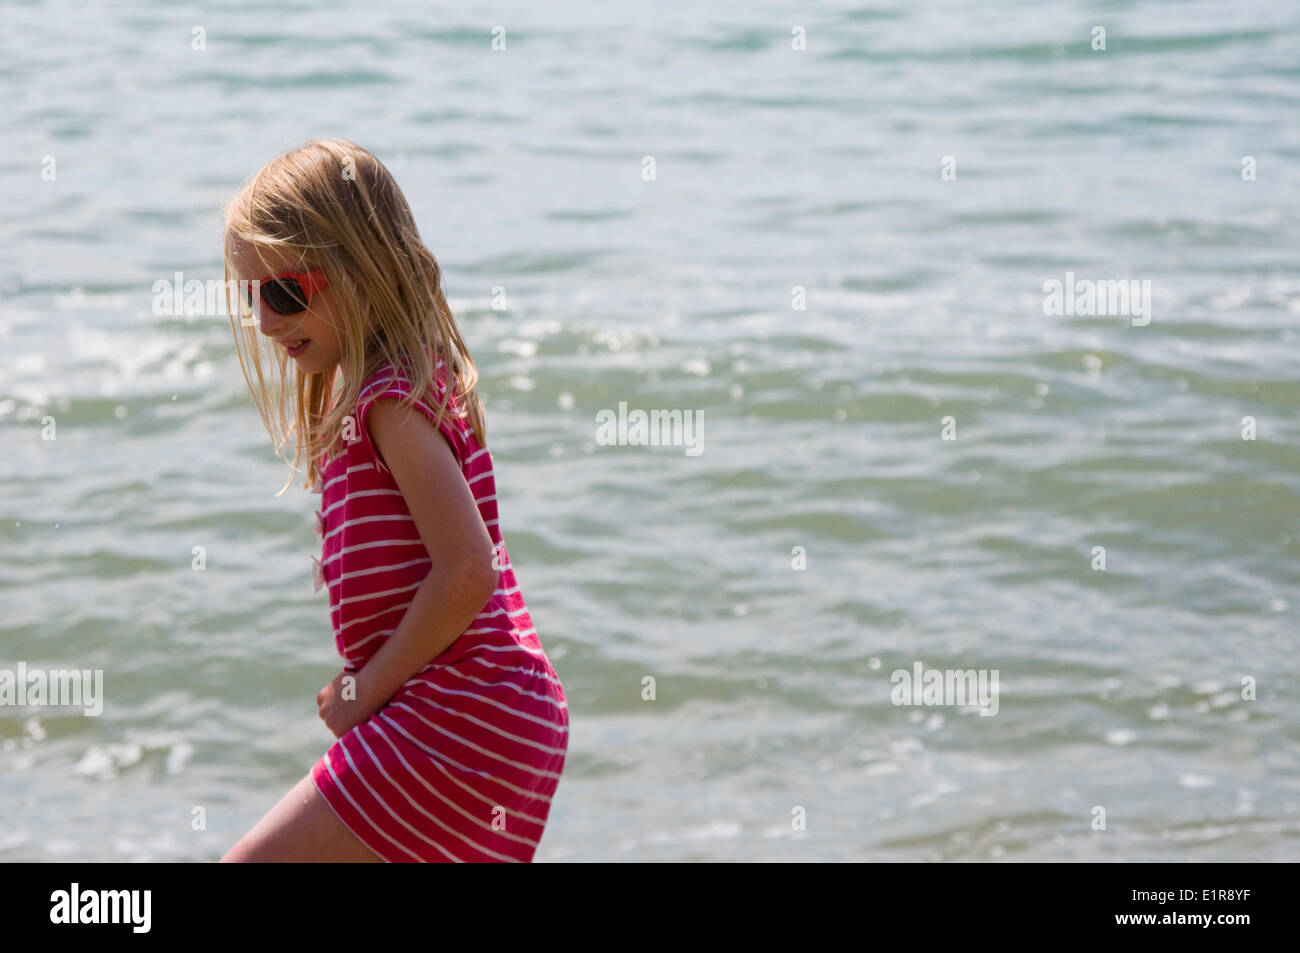 pretty, young blonde girl wearing sunglasses walking by the sea Stock Photo